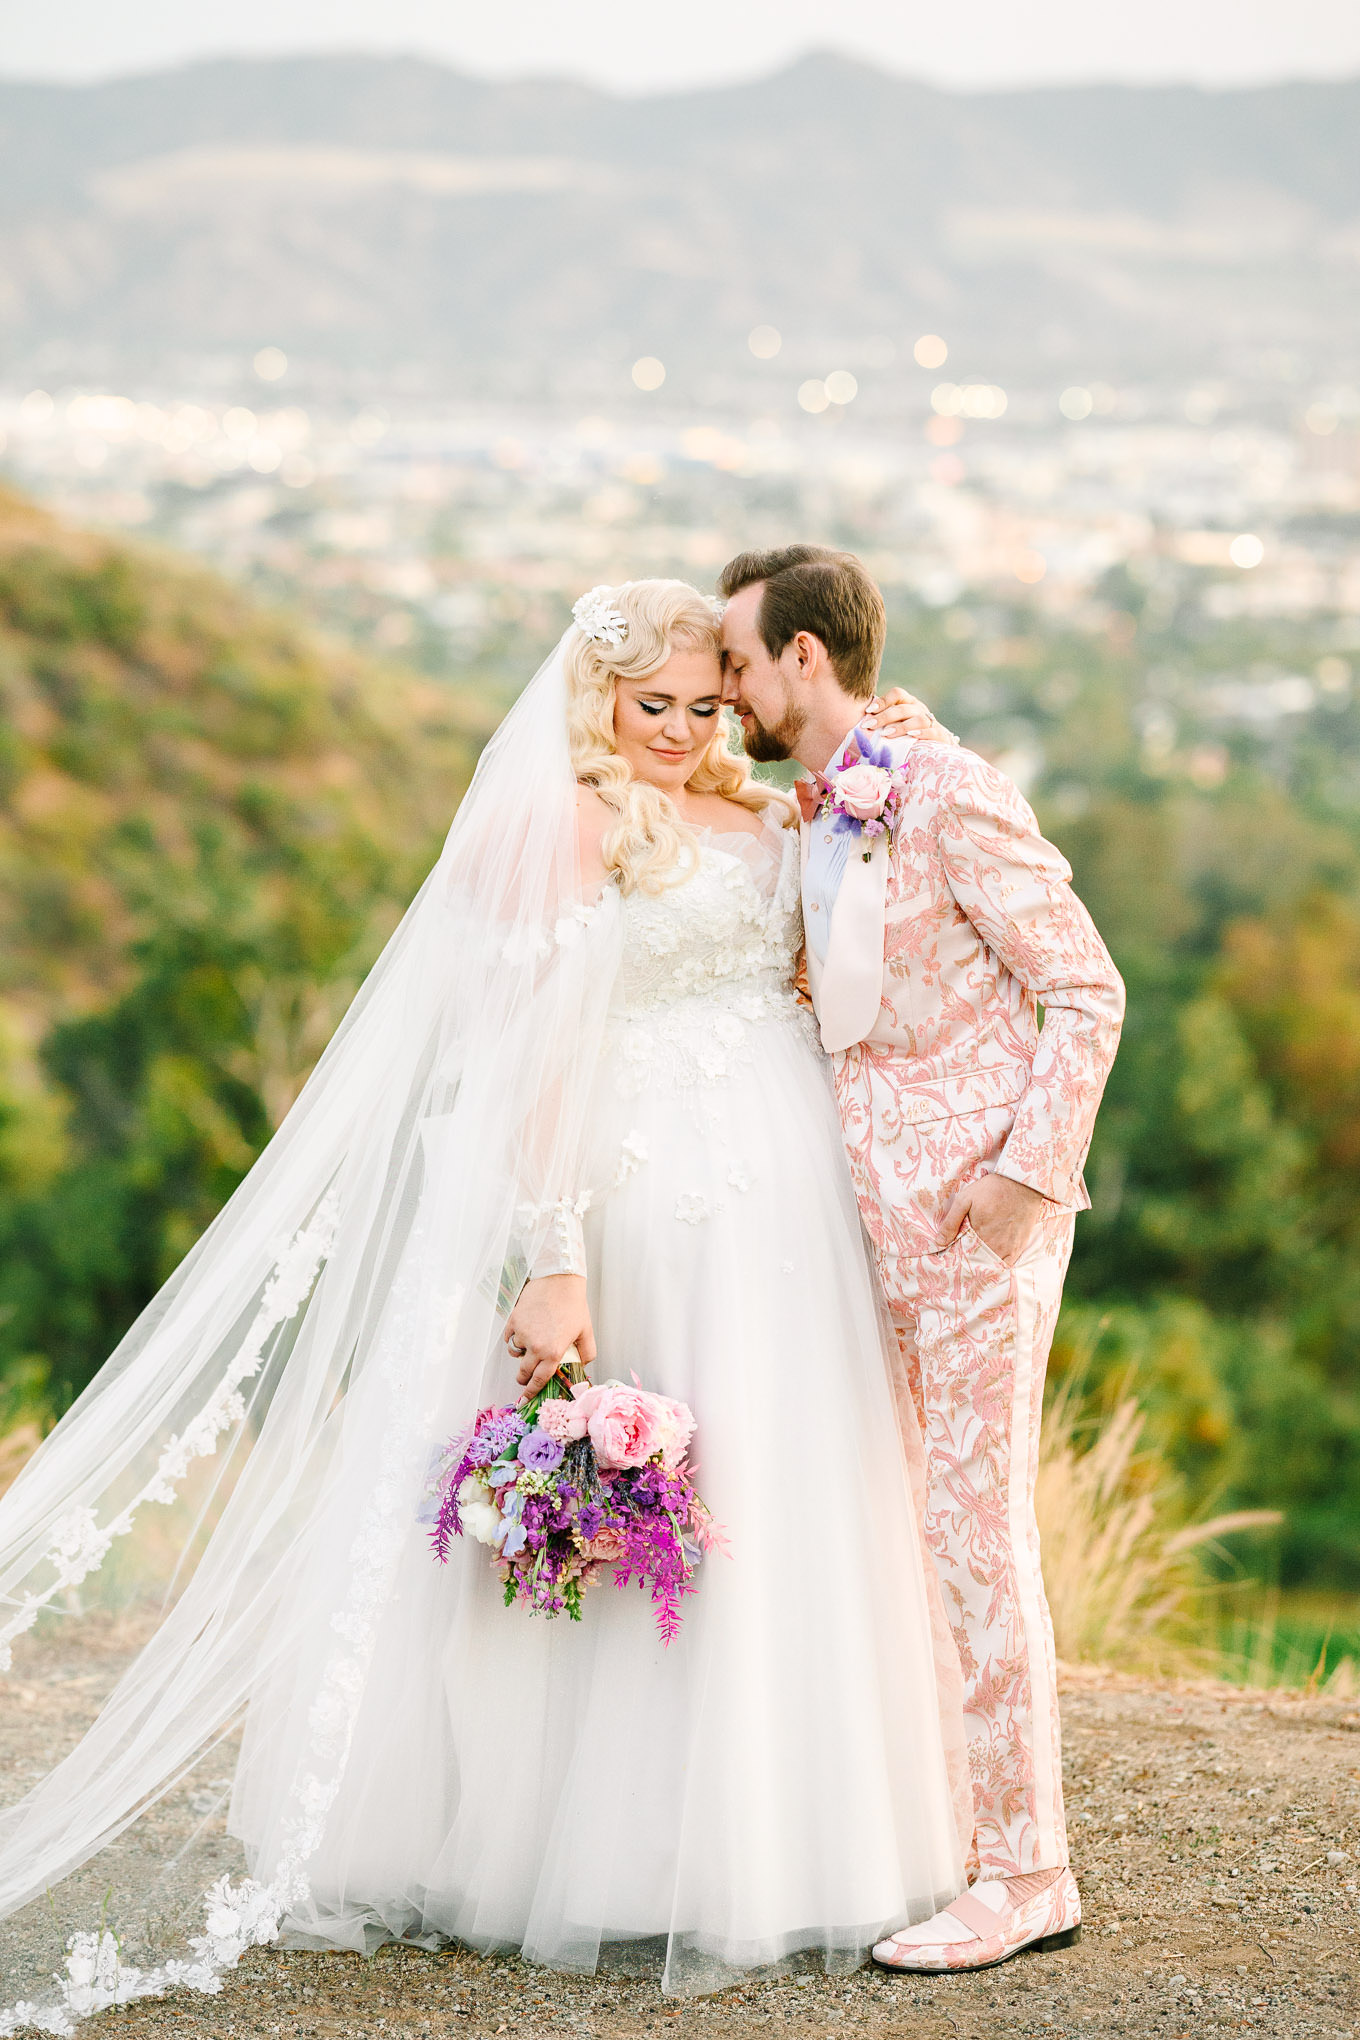 Heather Traska's wedding at Castaway Burbank | Wedding and elopement photography roundup | Los Angeles and Palm Springs photographer | #losangeleswedding #palmspringswedding #elopementphotographer Source: Mary Costa Photography | Los Angeles